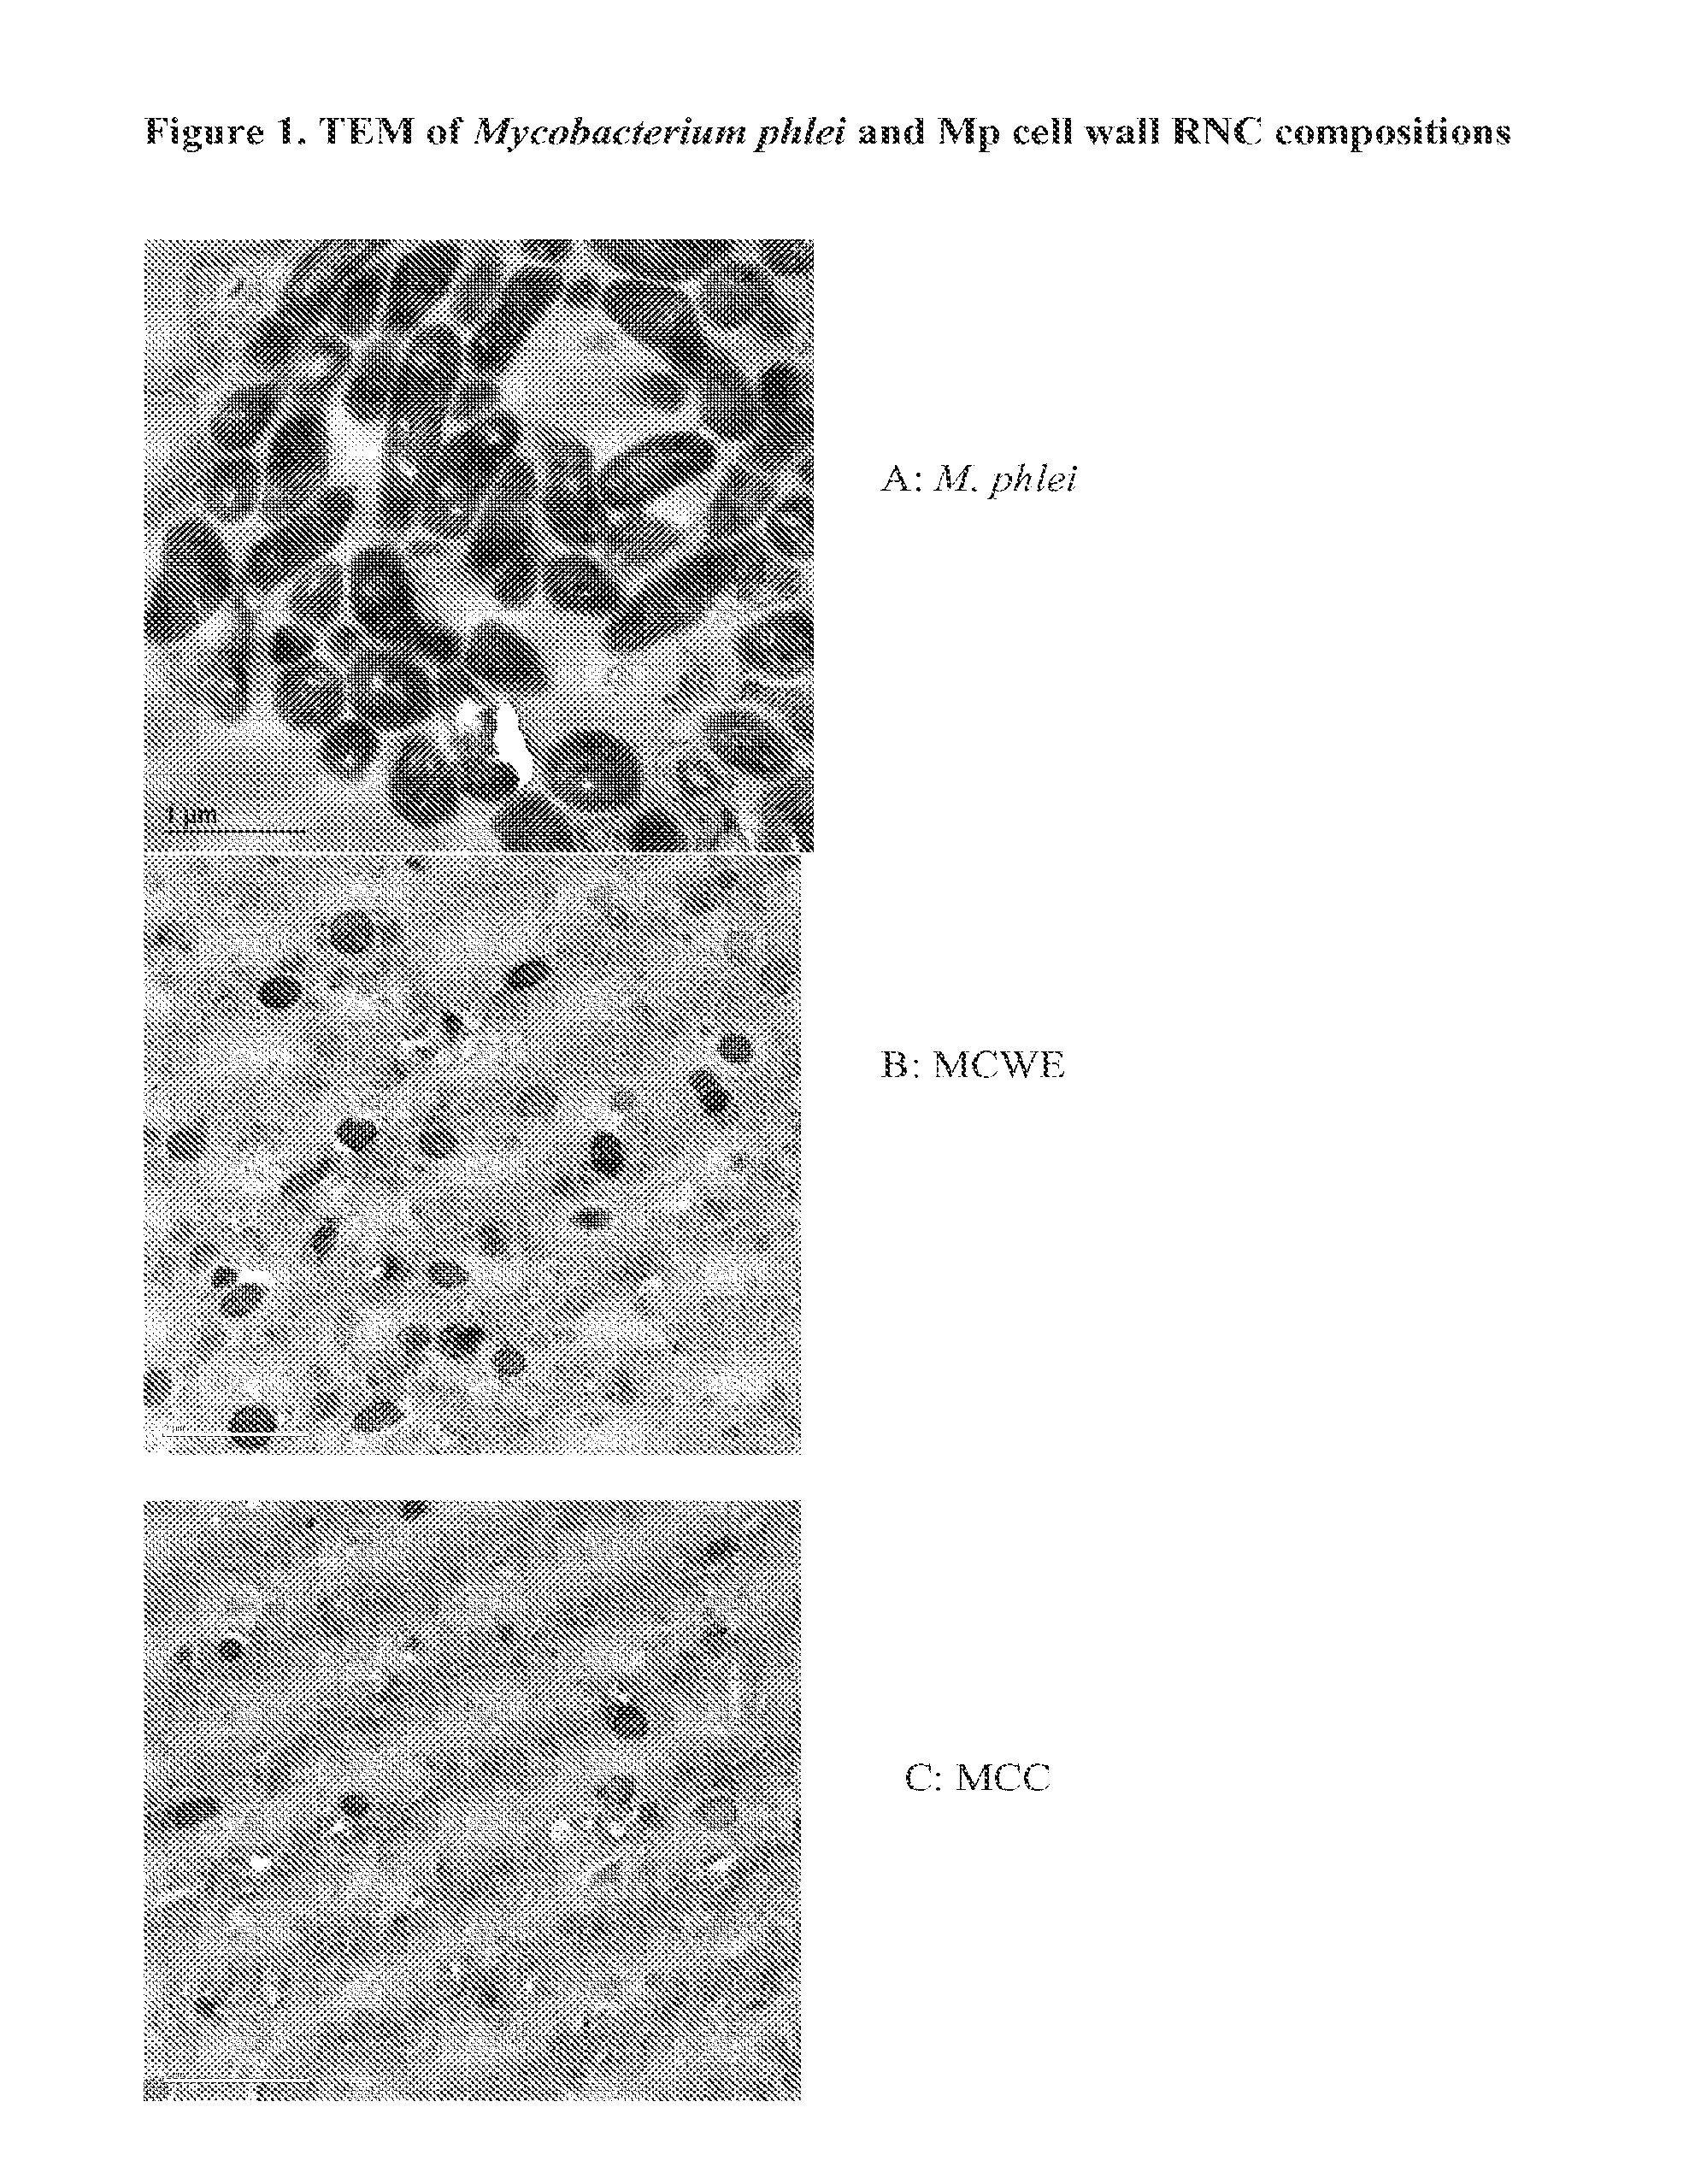 Bacterial Ribonucleic Acid Cell Wall Compositions and Methods of Making and Using Them